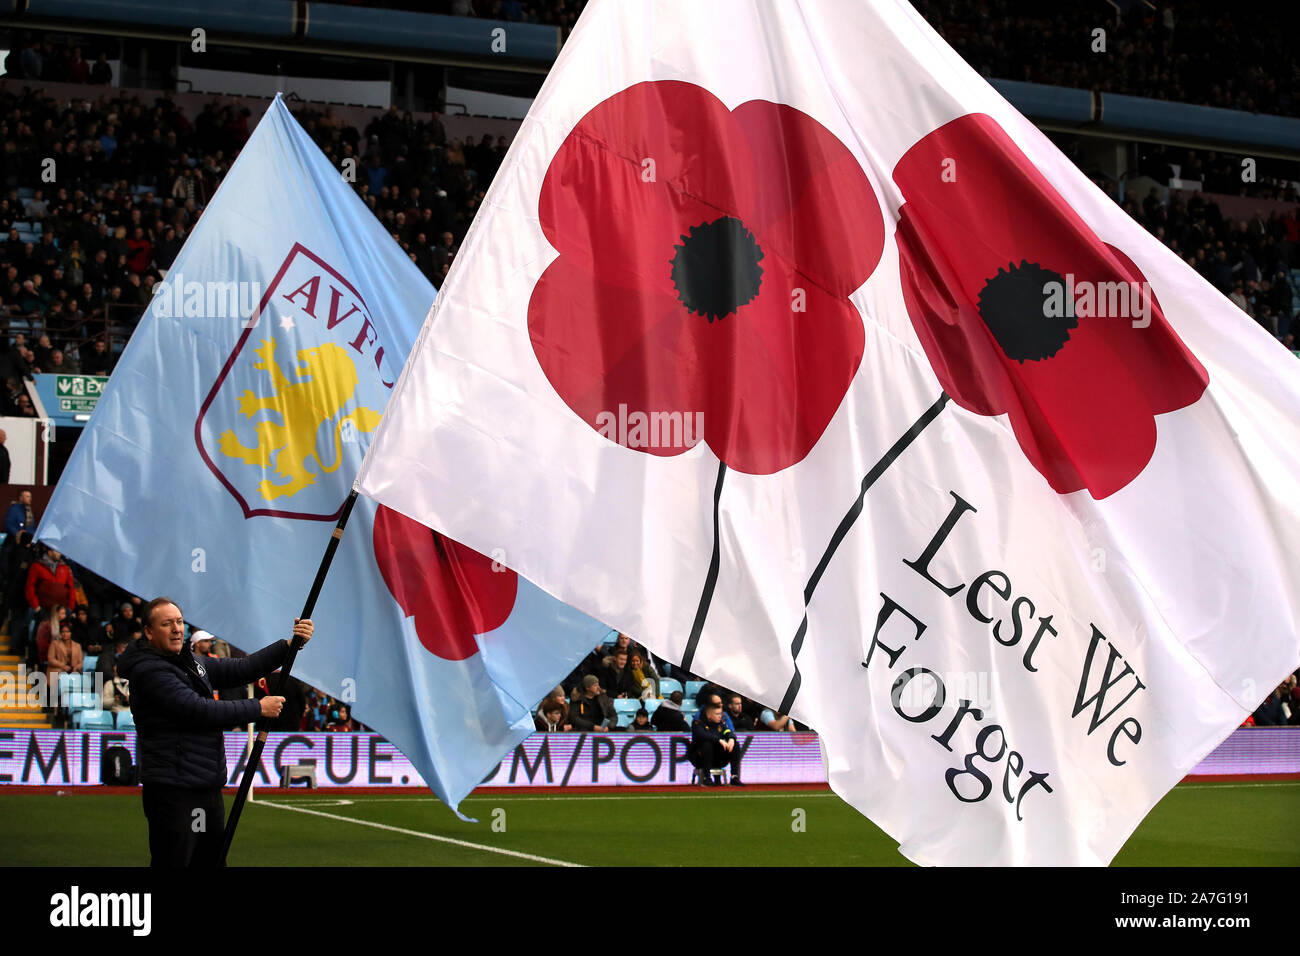 Lest we forget flags are waved during the Premiership match at Villa Park, Birmingham. Stock Photo